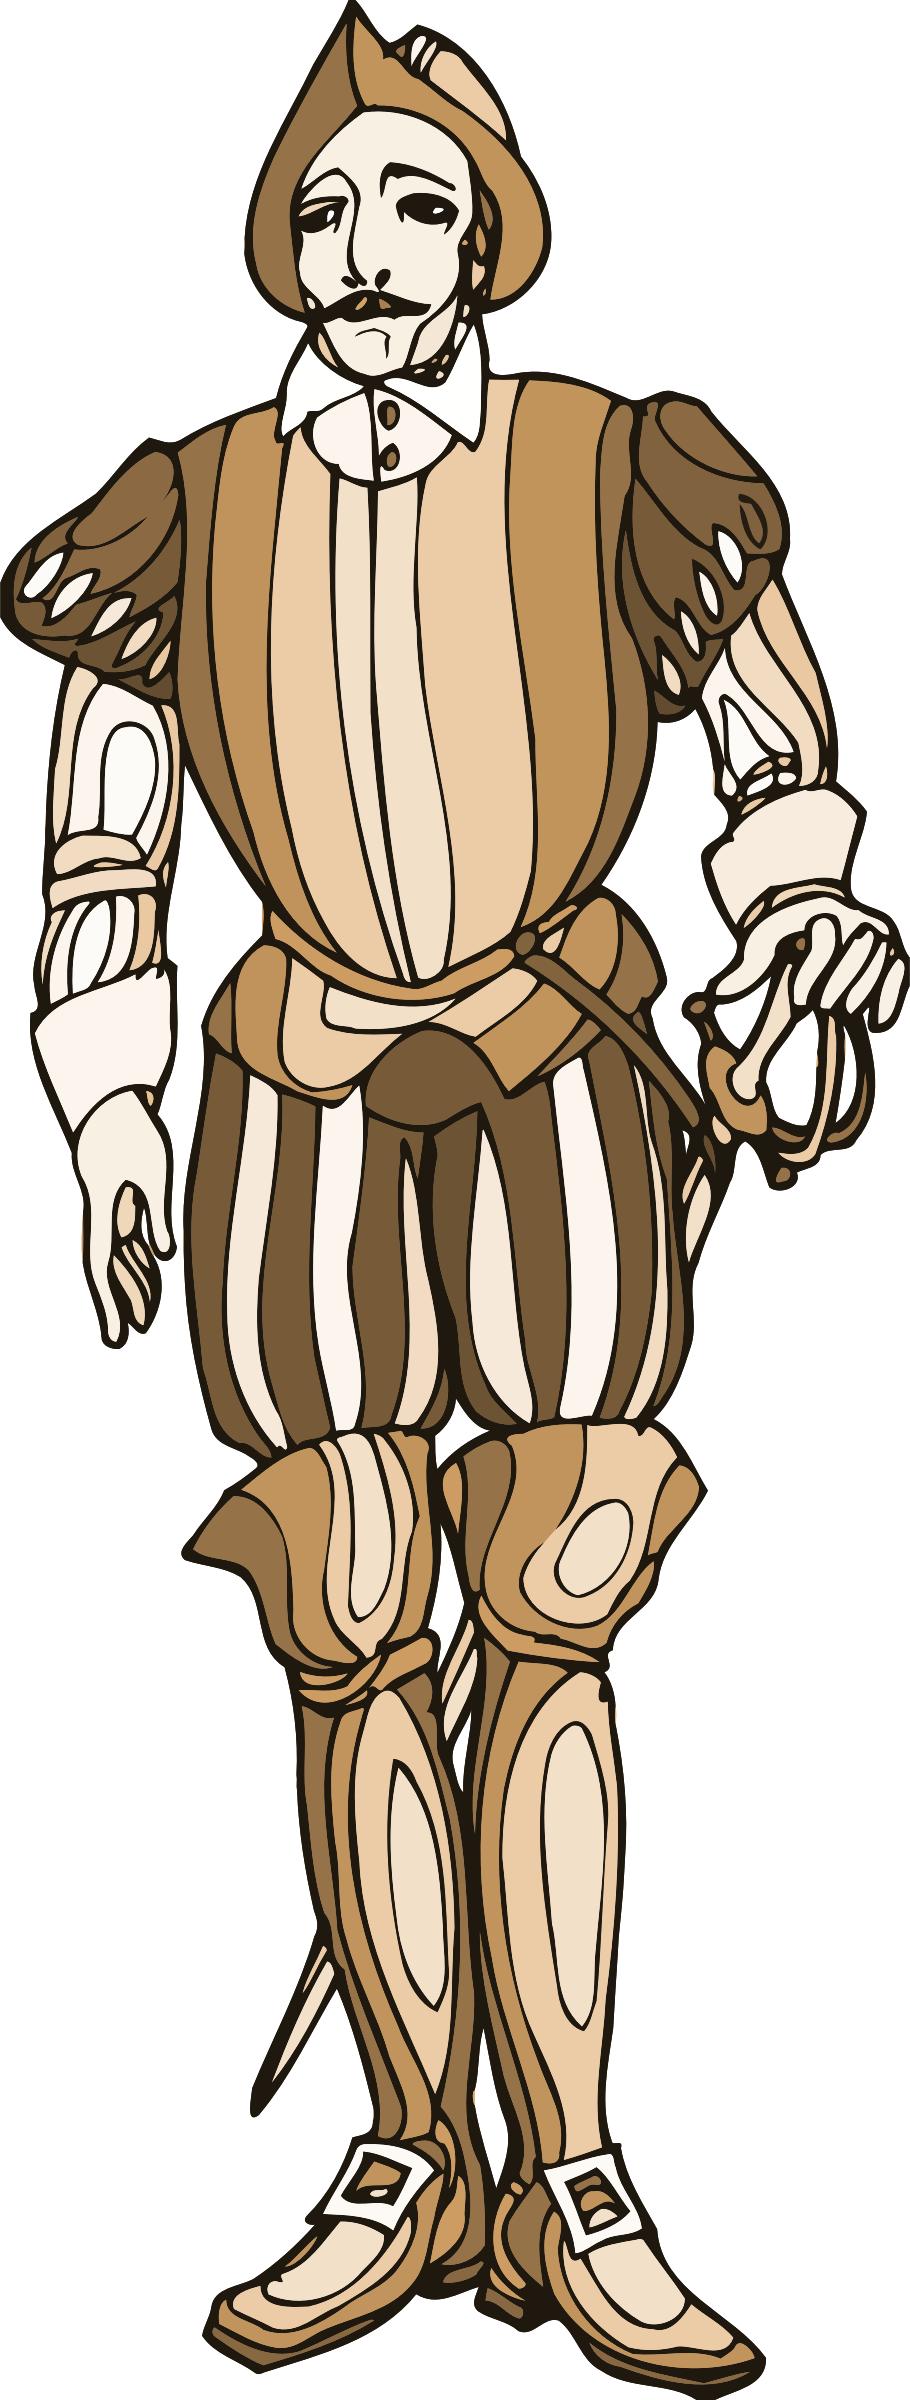 Shakespeare characters - soldier png